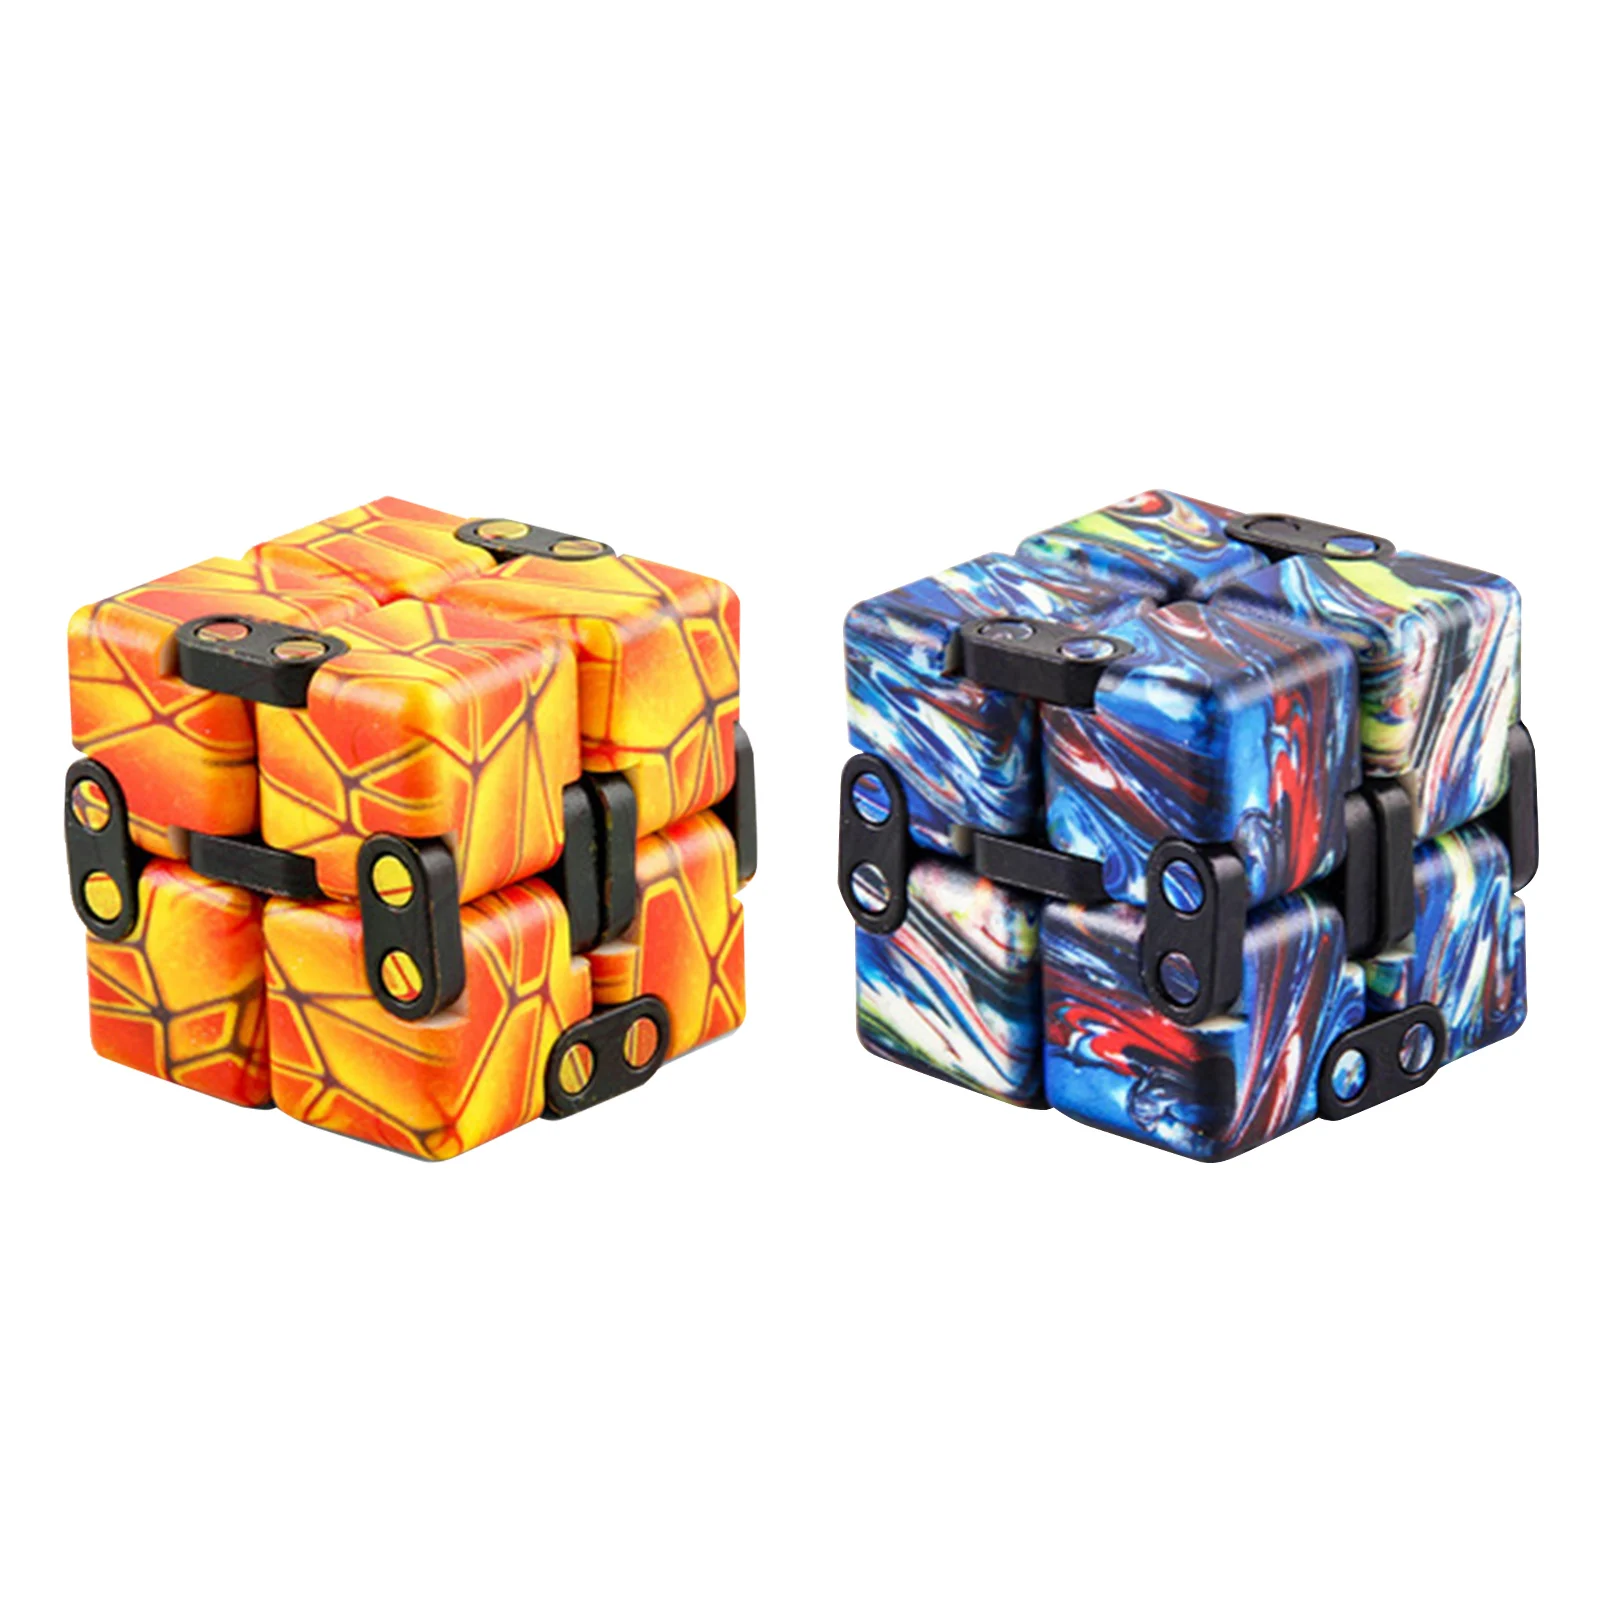 

Creative Infinite Cube Anti-stress Fidget Toys Infinity Cube Magic Cube Office Flip Cubic Puzzle Stop Stress Reliever Autism Toy